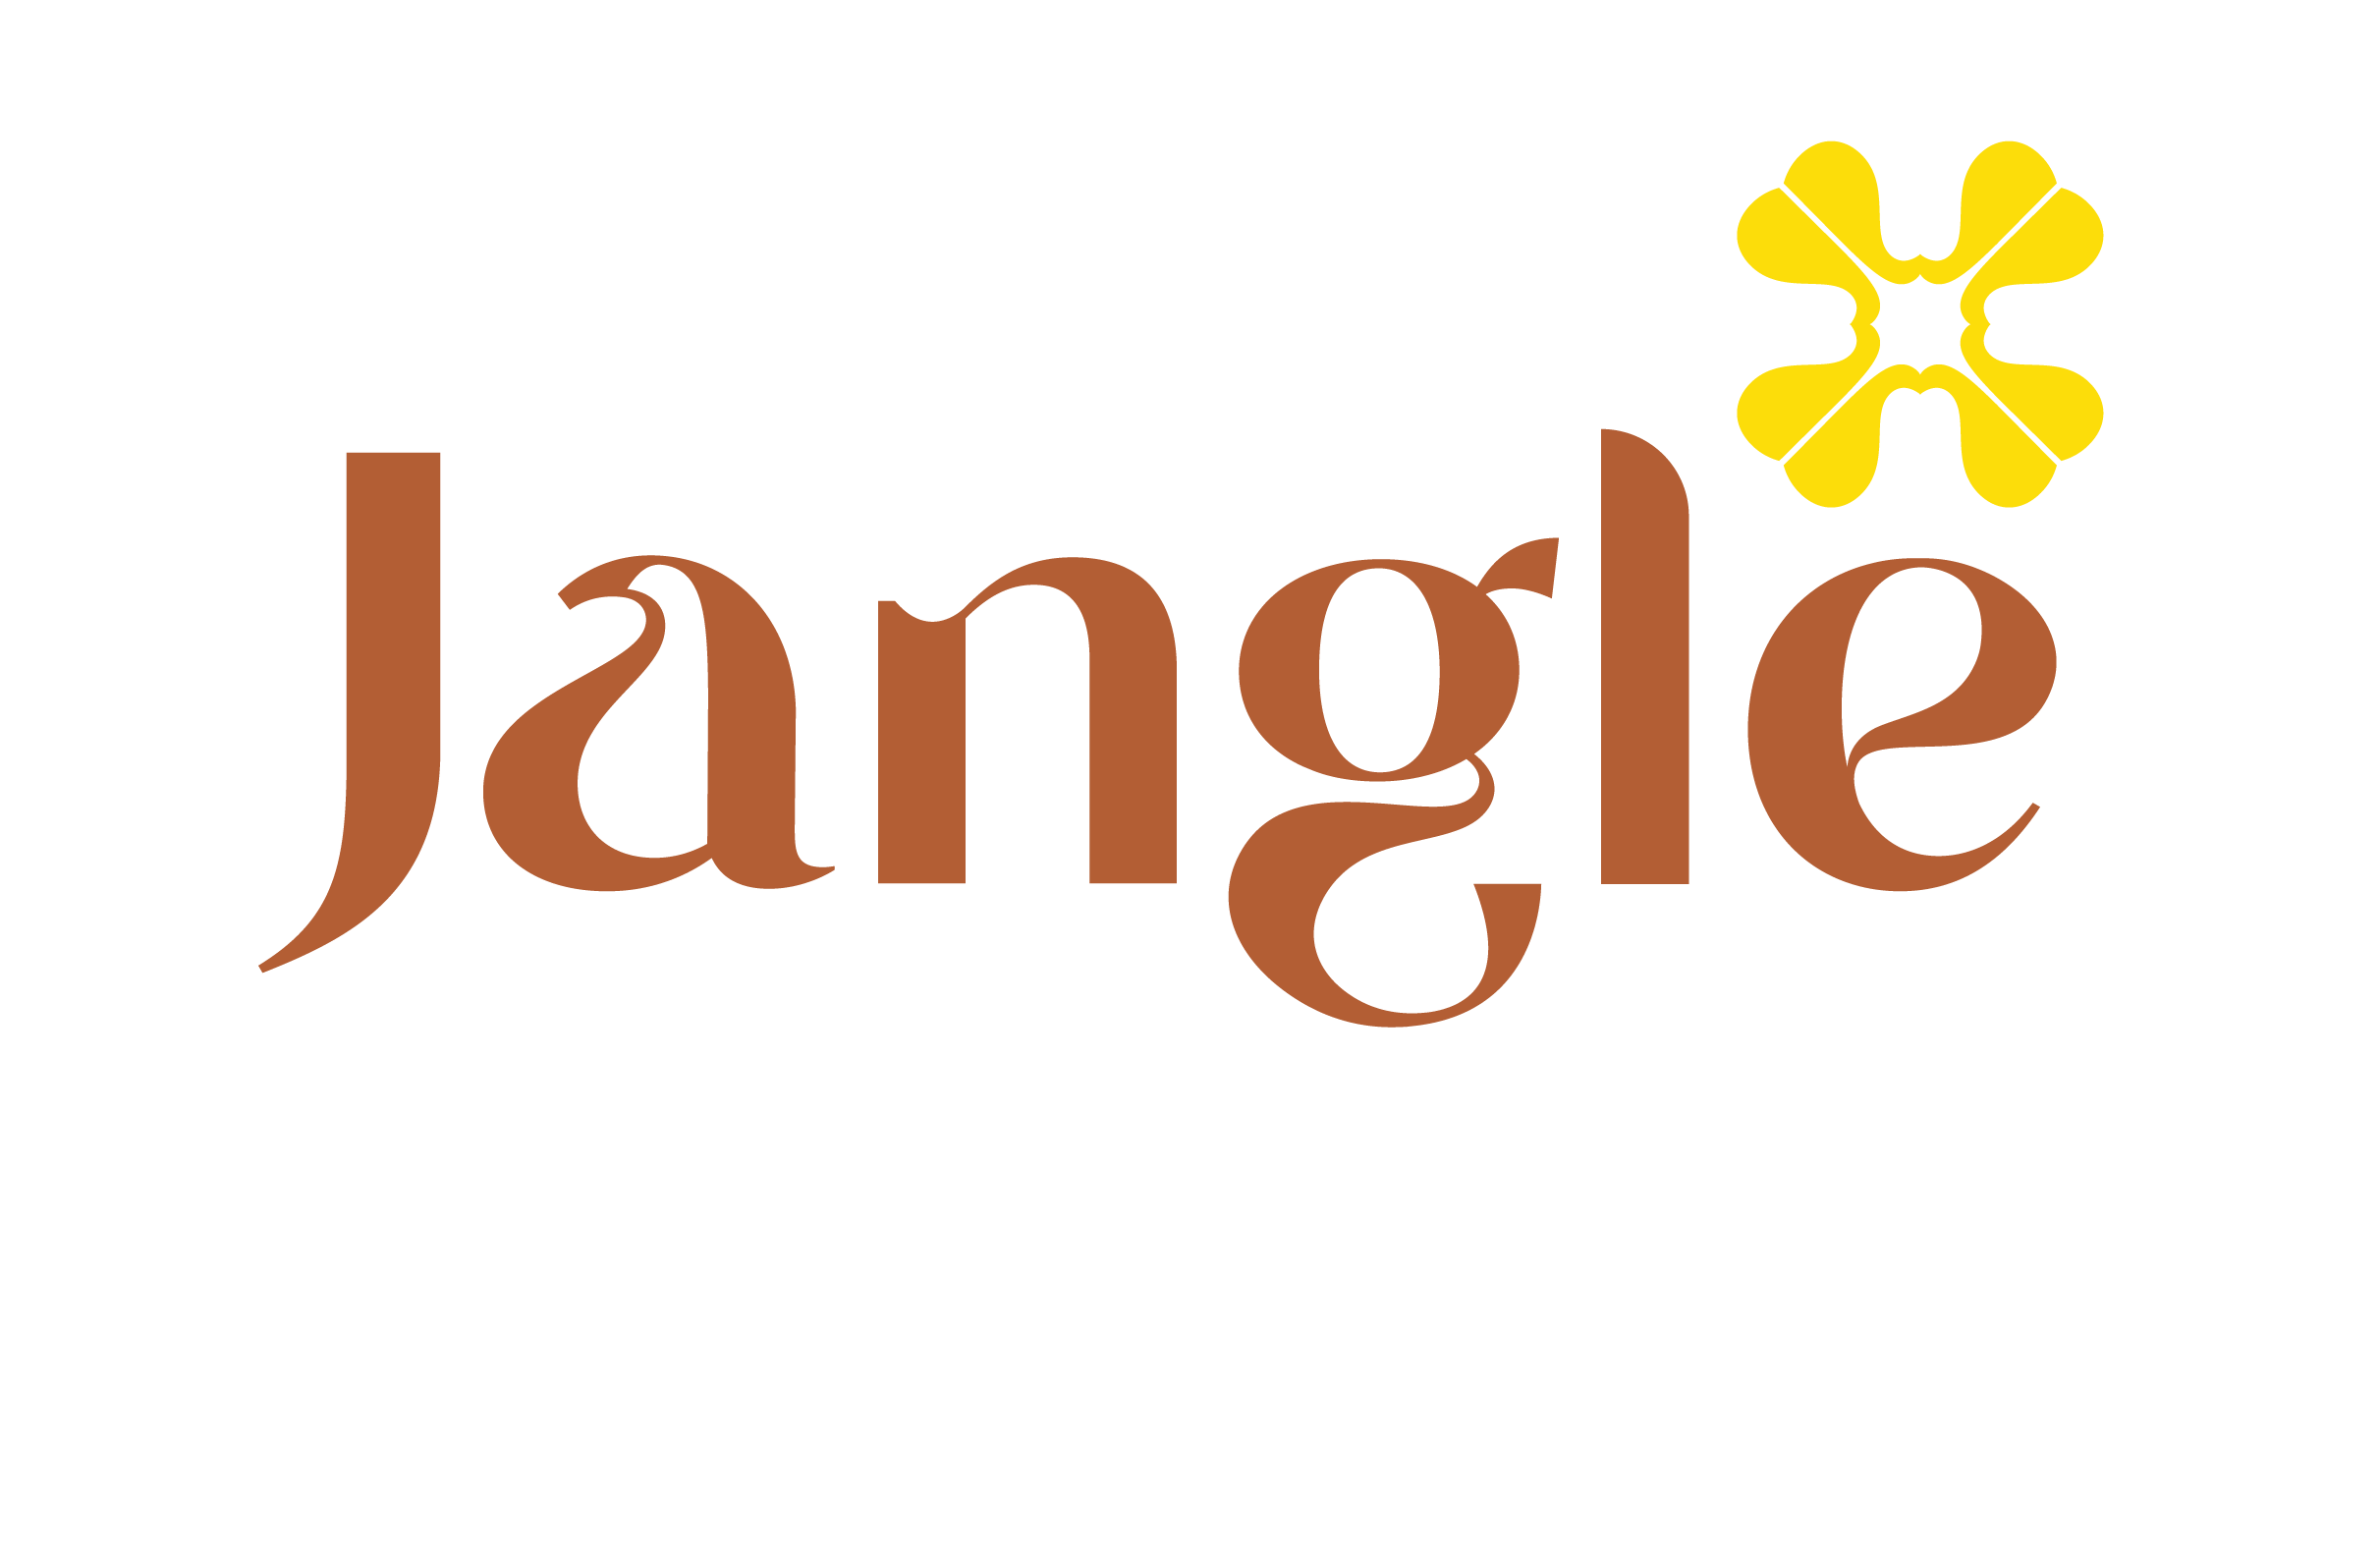 A sleek and stylish logo for the California-based fashion brand, Jangle. The logo features bold, modern typography alongside a simply unique flower icon, and a clean, minimalist design that embodies the brand's aesthetic.